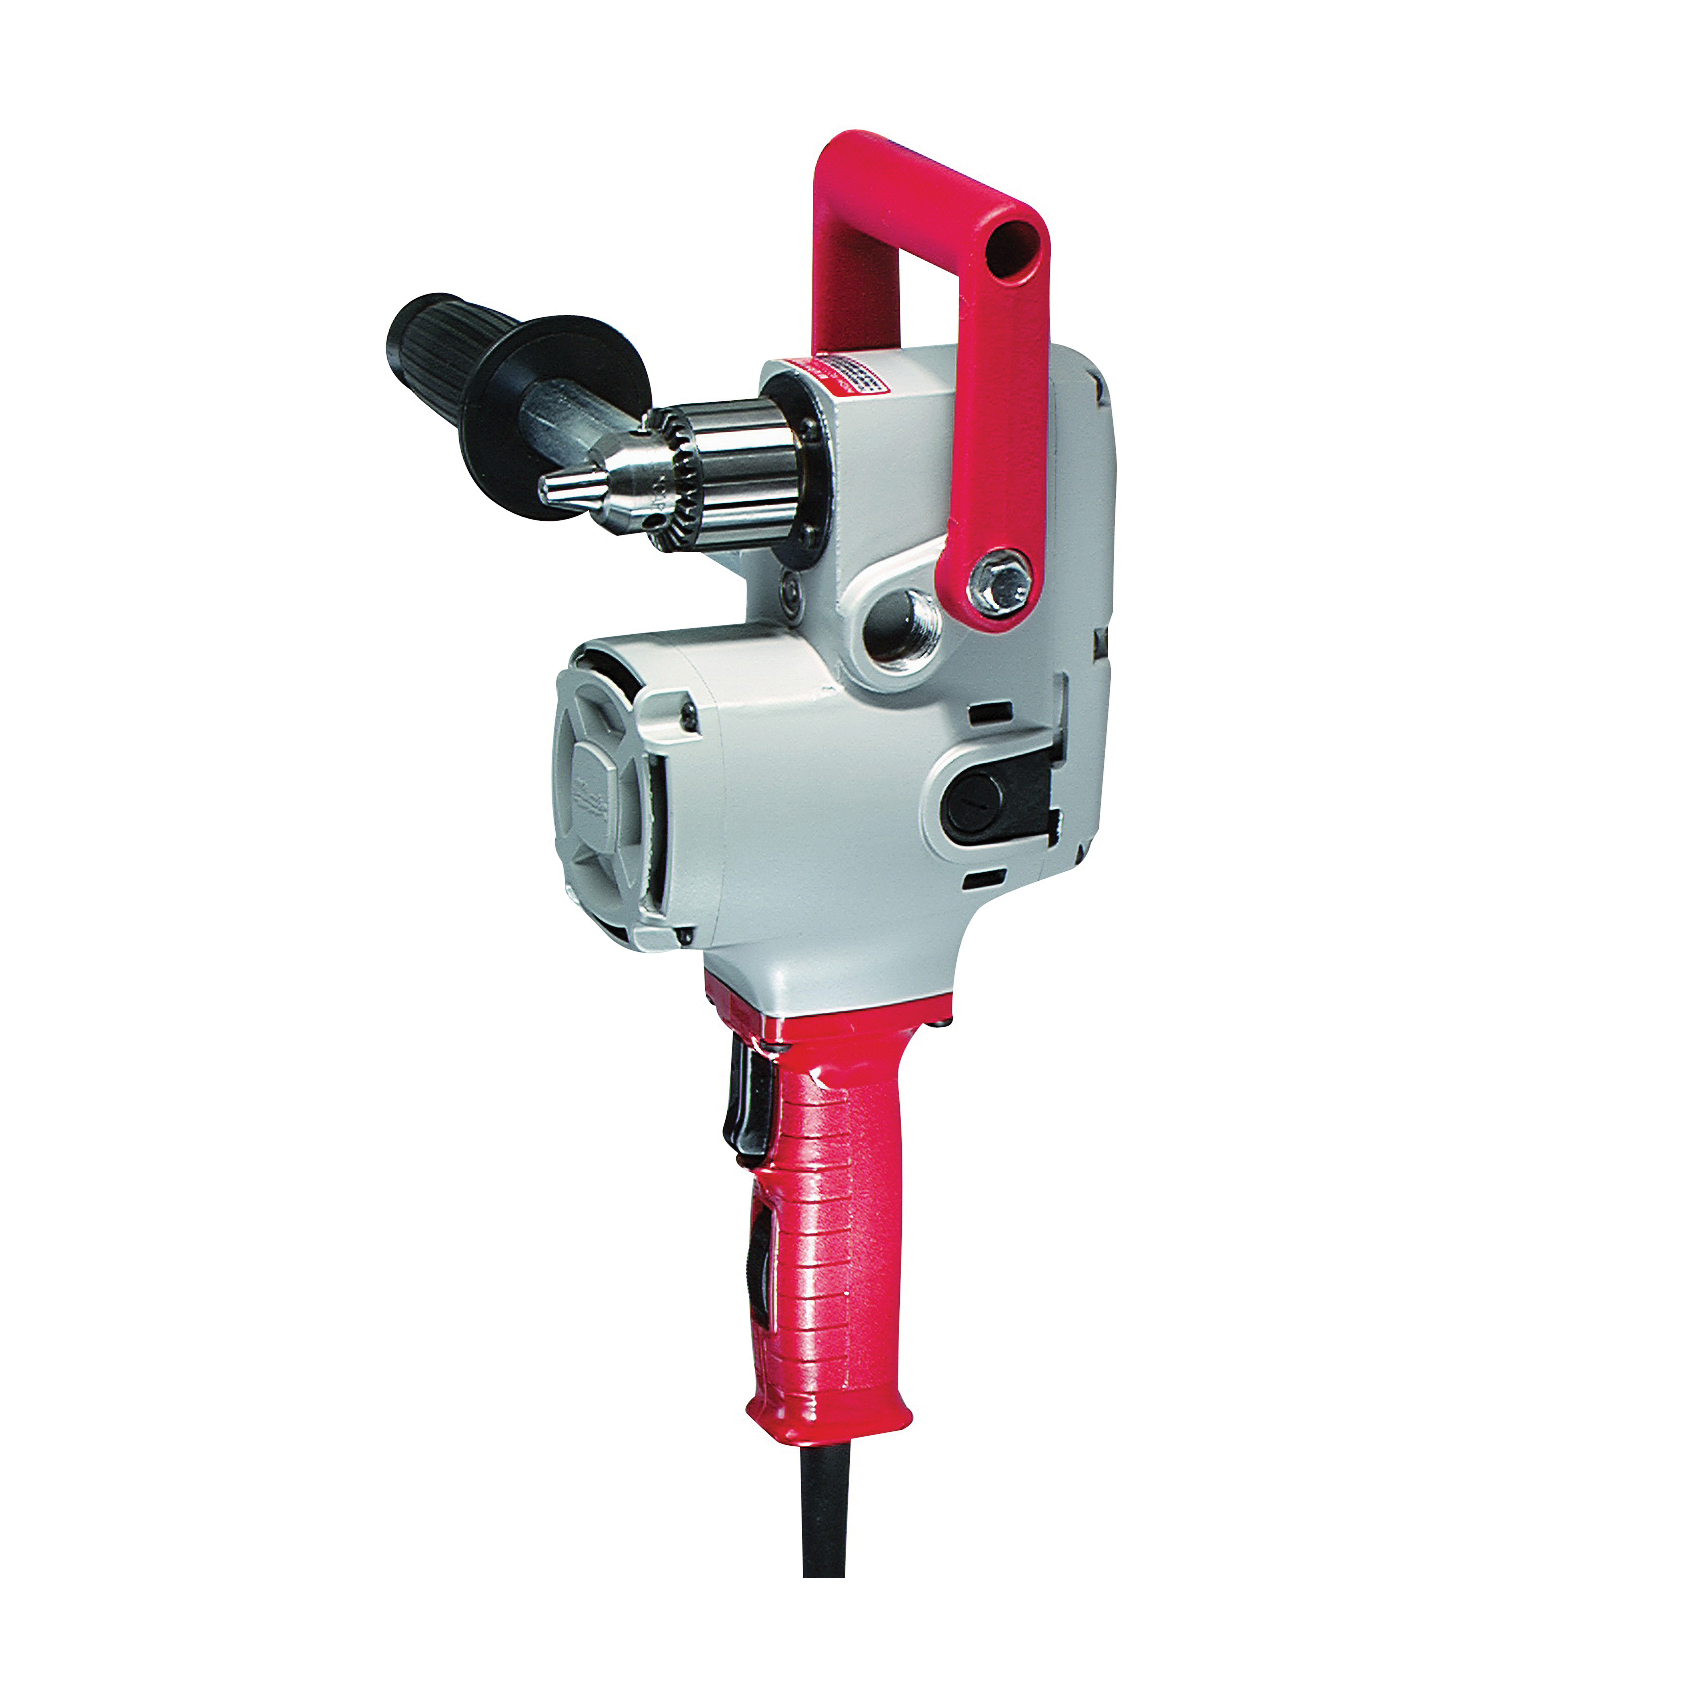 1675-6 Electric Drill, 7.5 A, 1/2 in Chuck, Keyed Chuck, 8 ft L Cord, Includes: (1) Pipe Handle